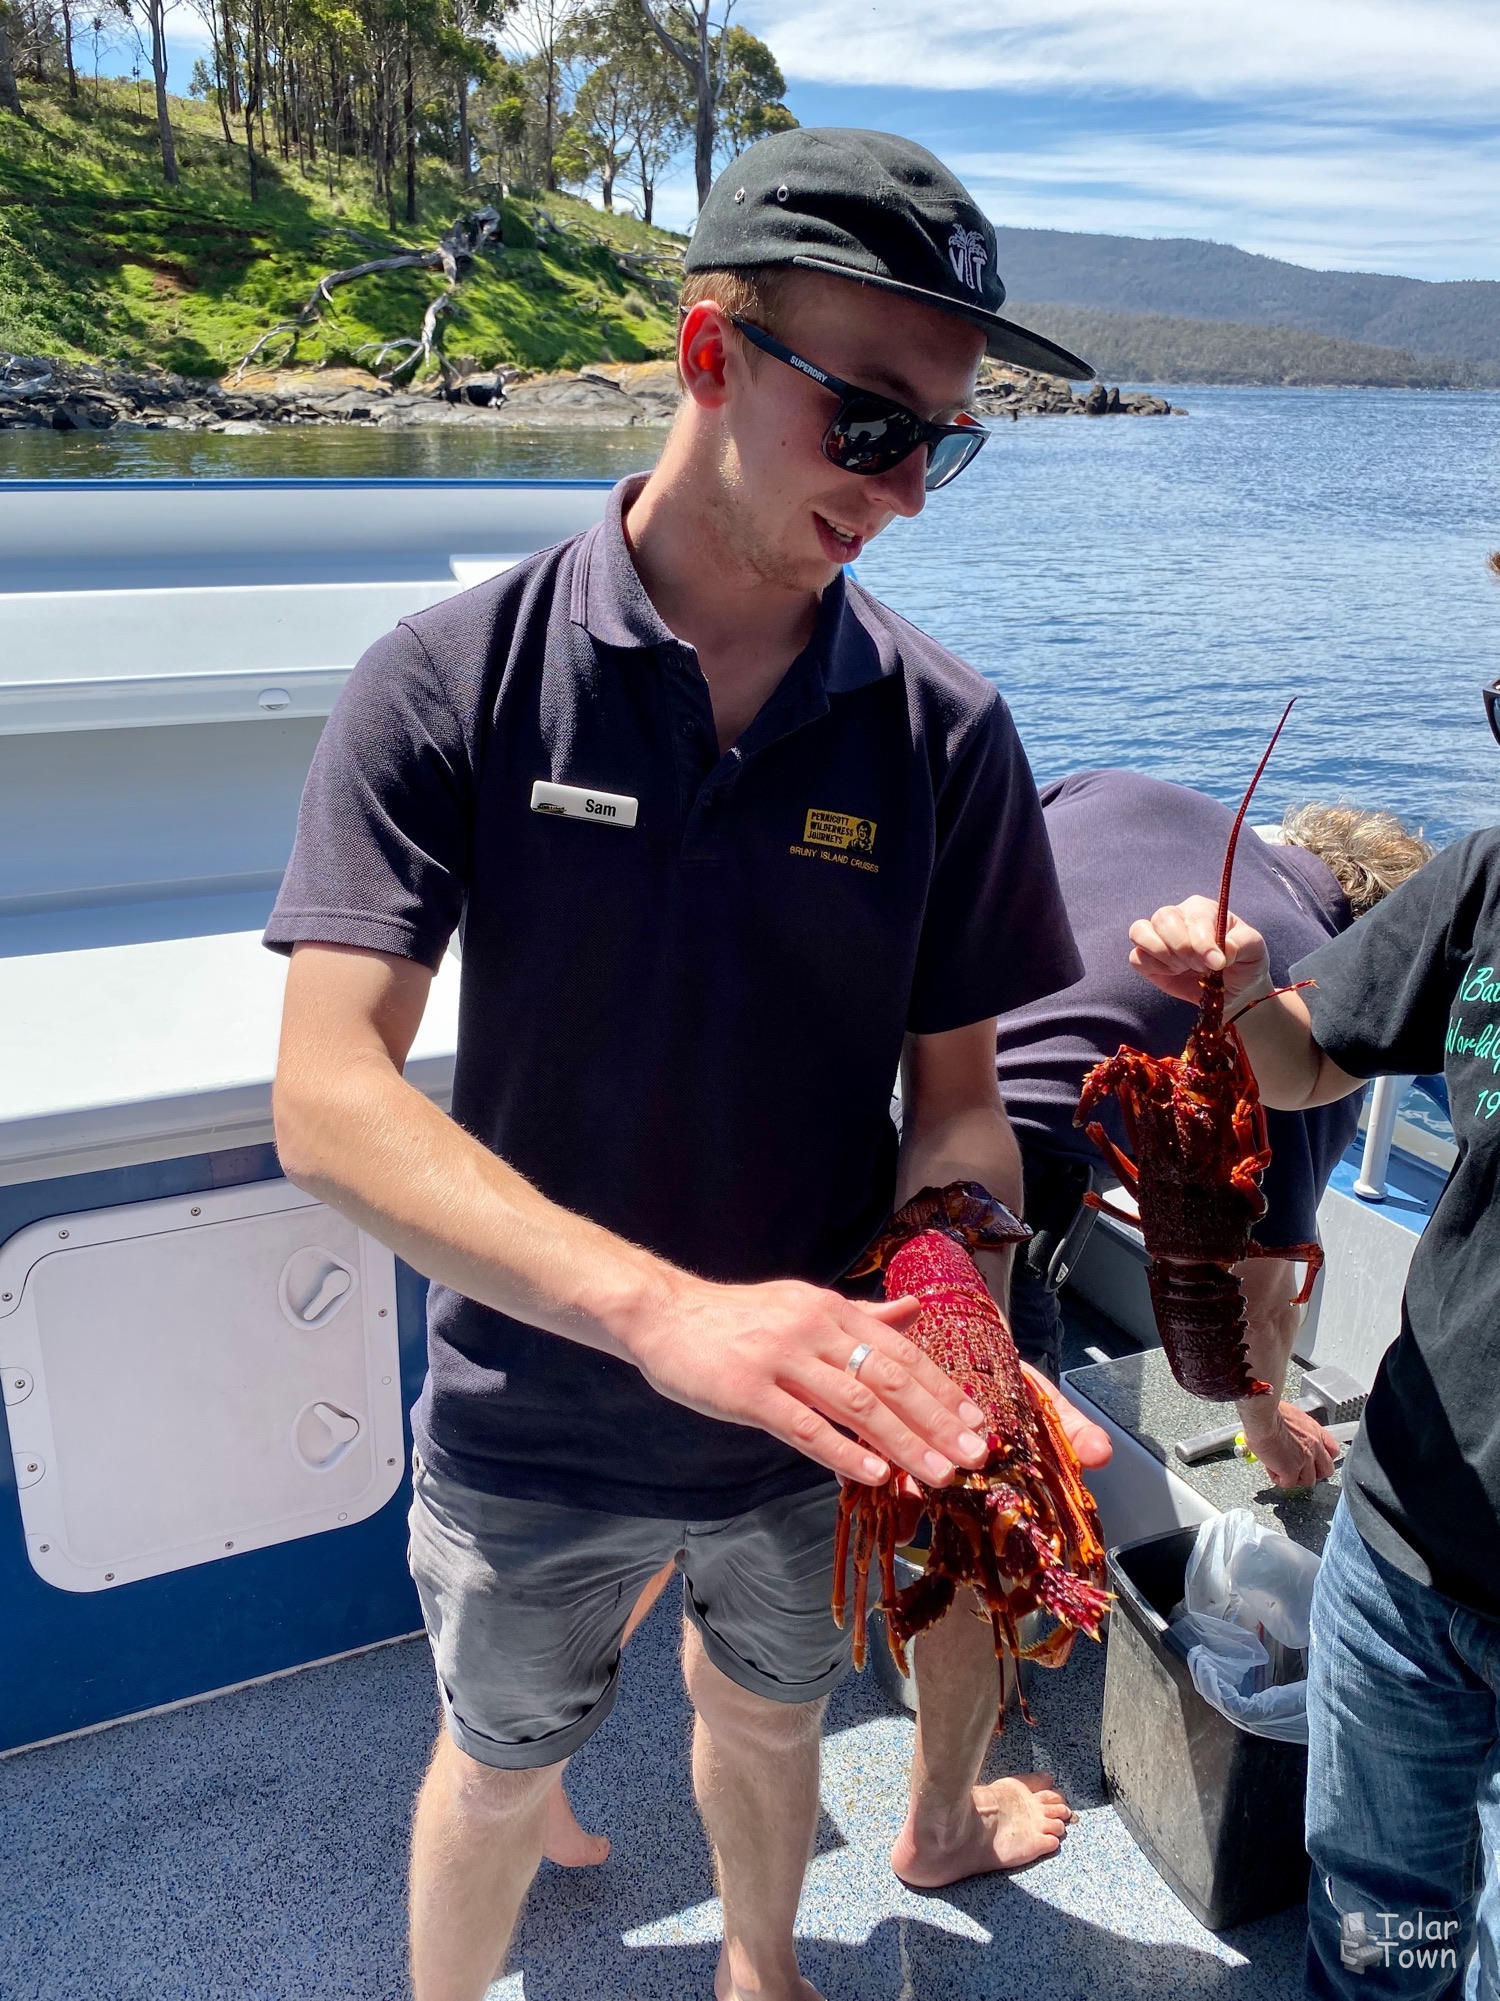 Sam petting the rock lobster